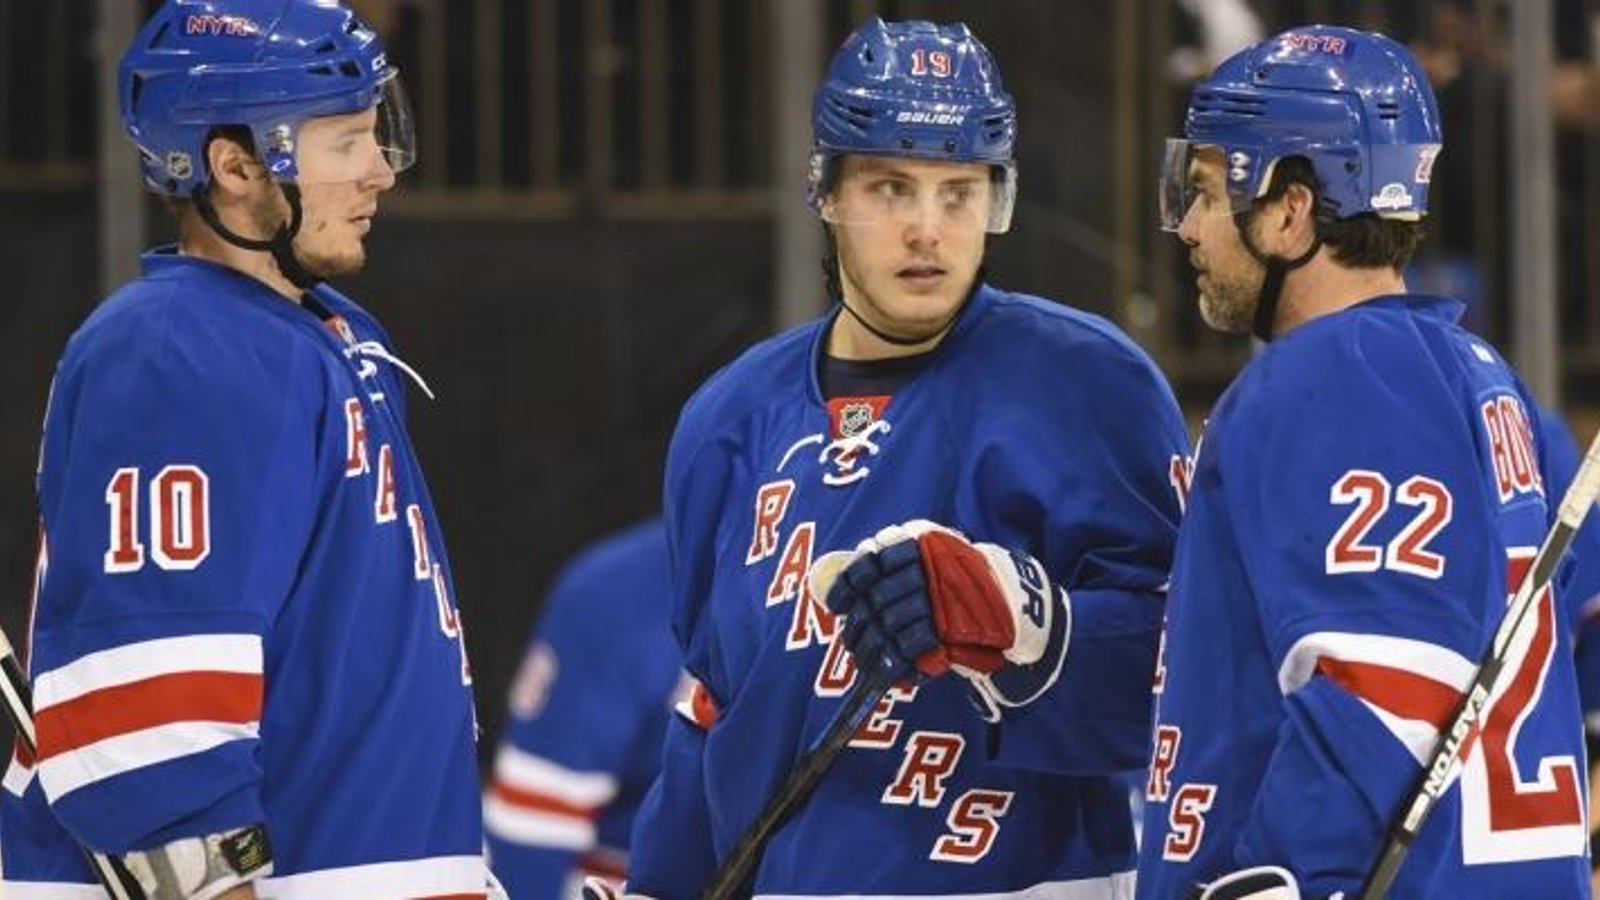 Rangers forward takes a puck to the face at practice, suffers some nasty damage.